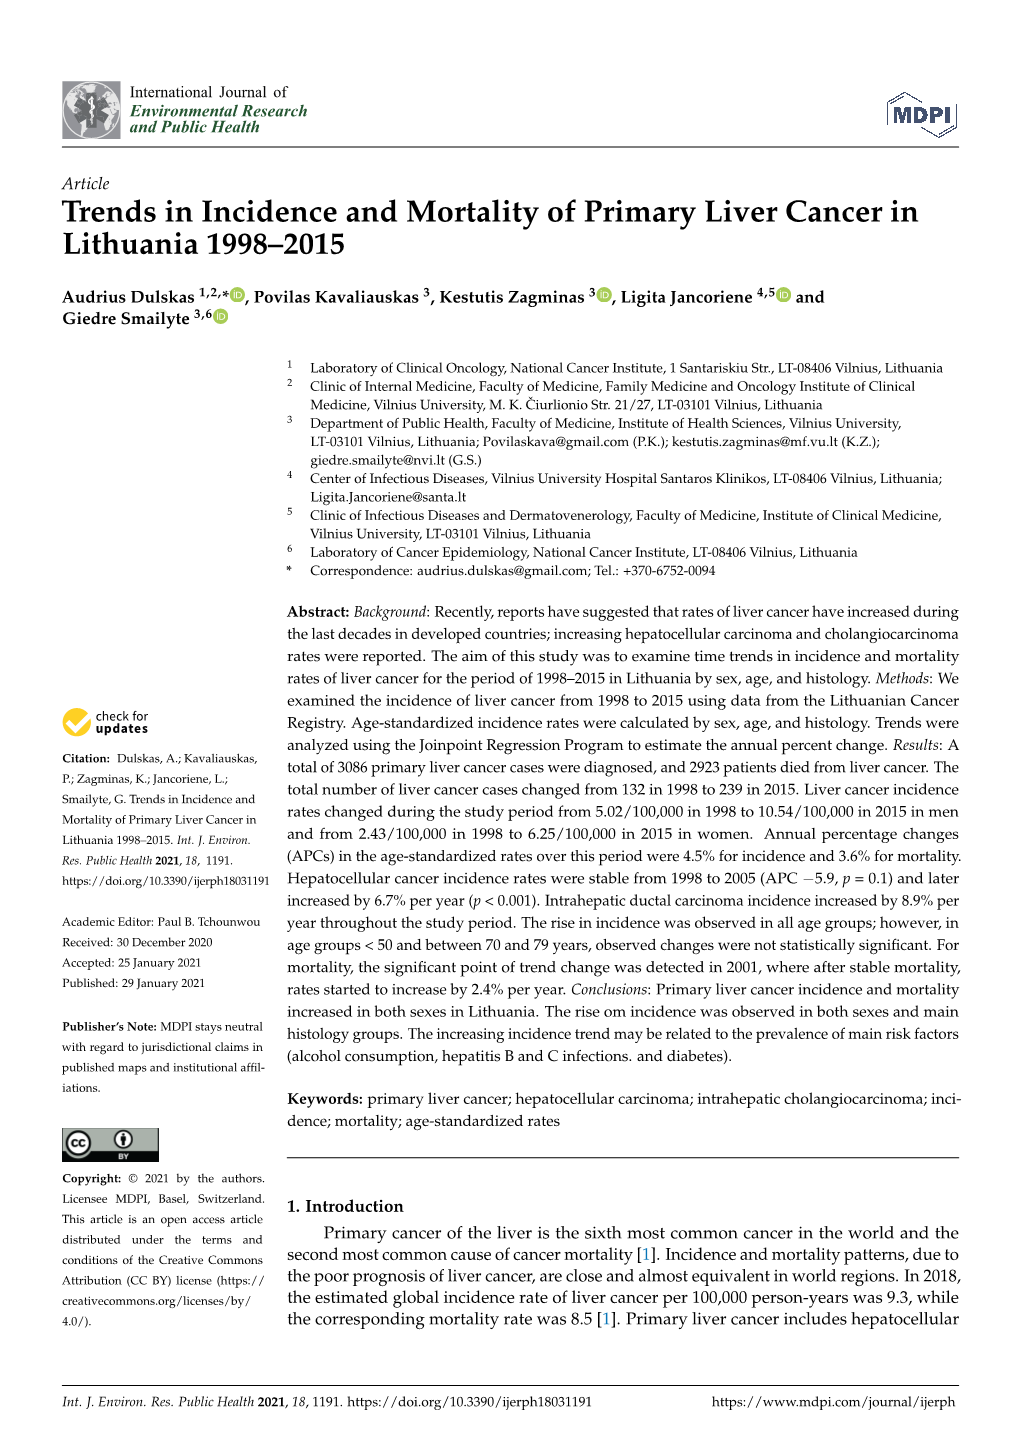 Trends in Incidence and Mortality of Primary Liver Cancer in Lithuania 1998–2015